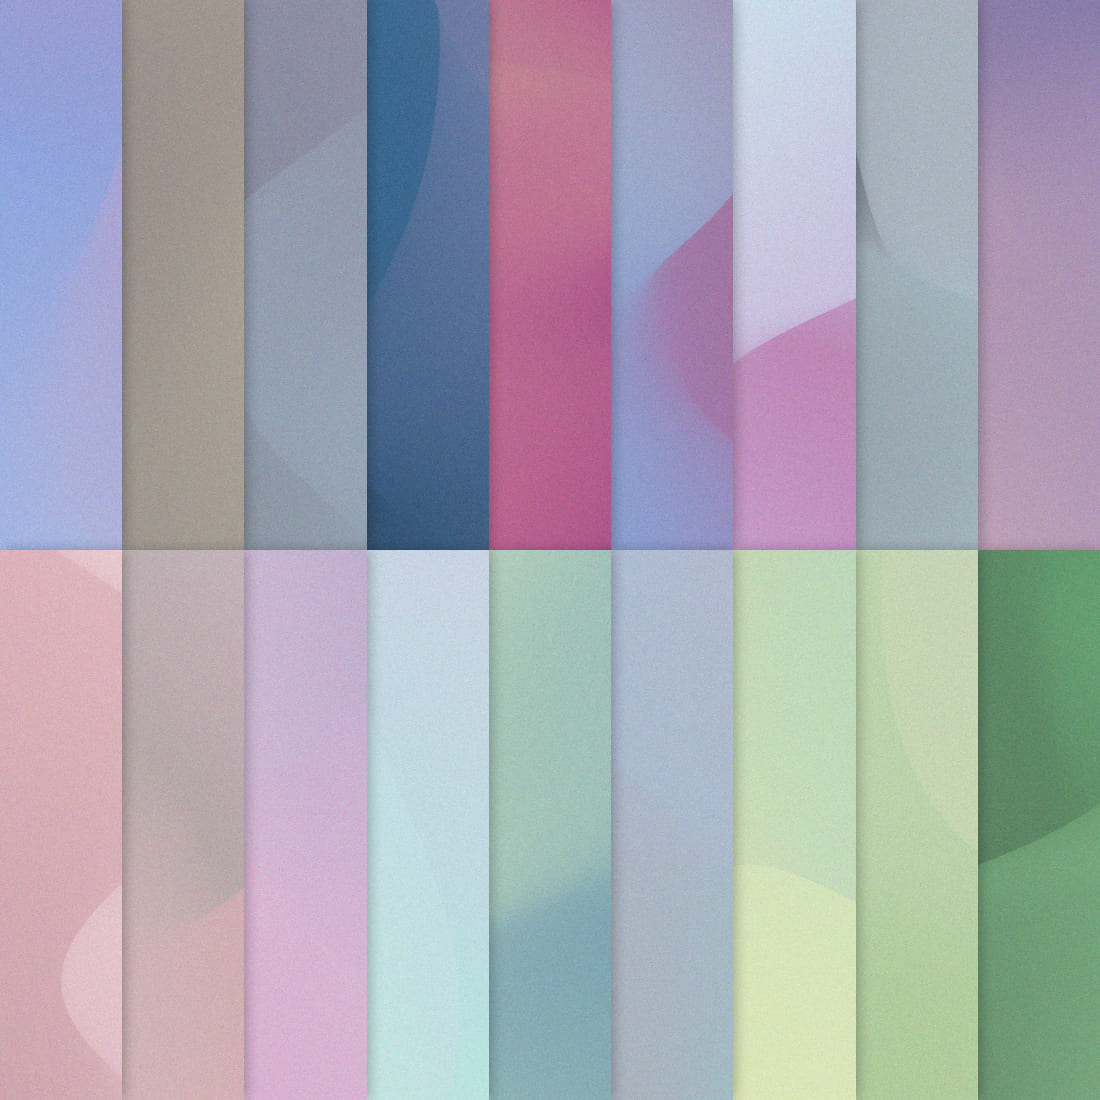 Abstract Gradient Colorful Backgrounds Design cover image.